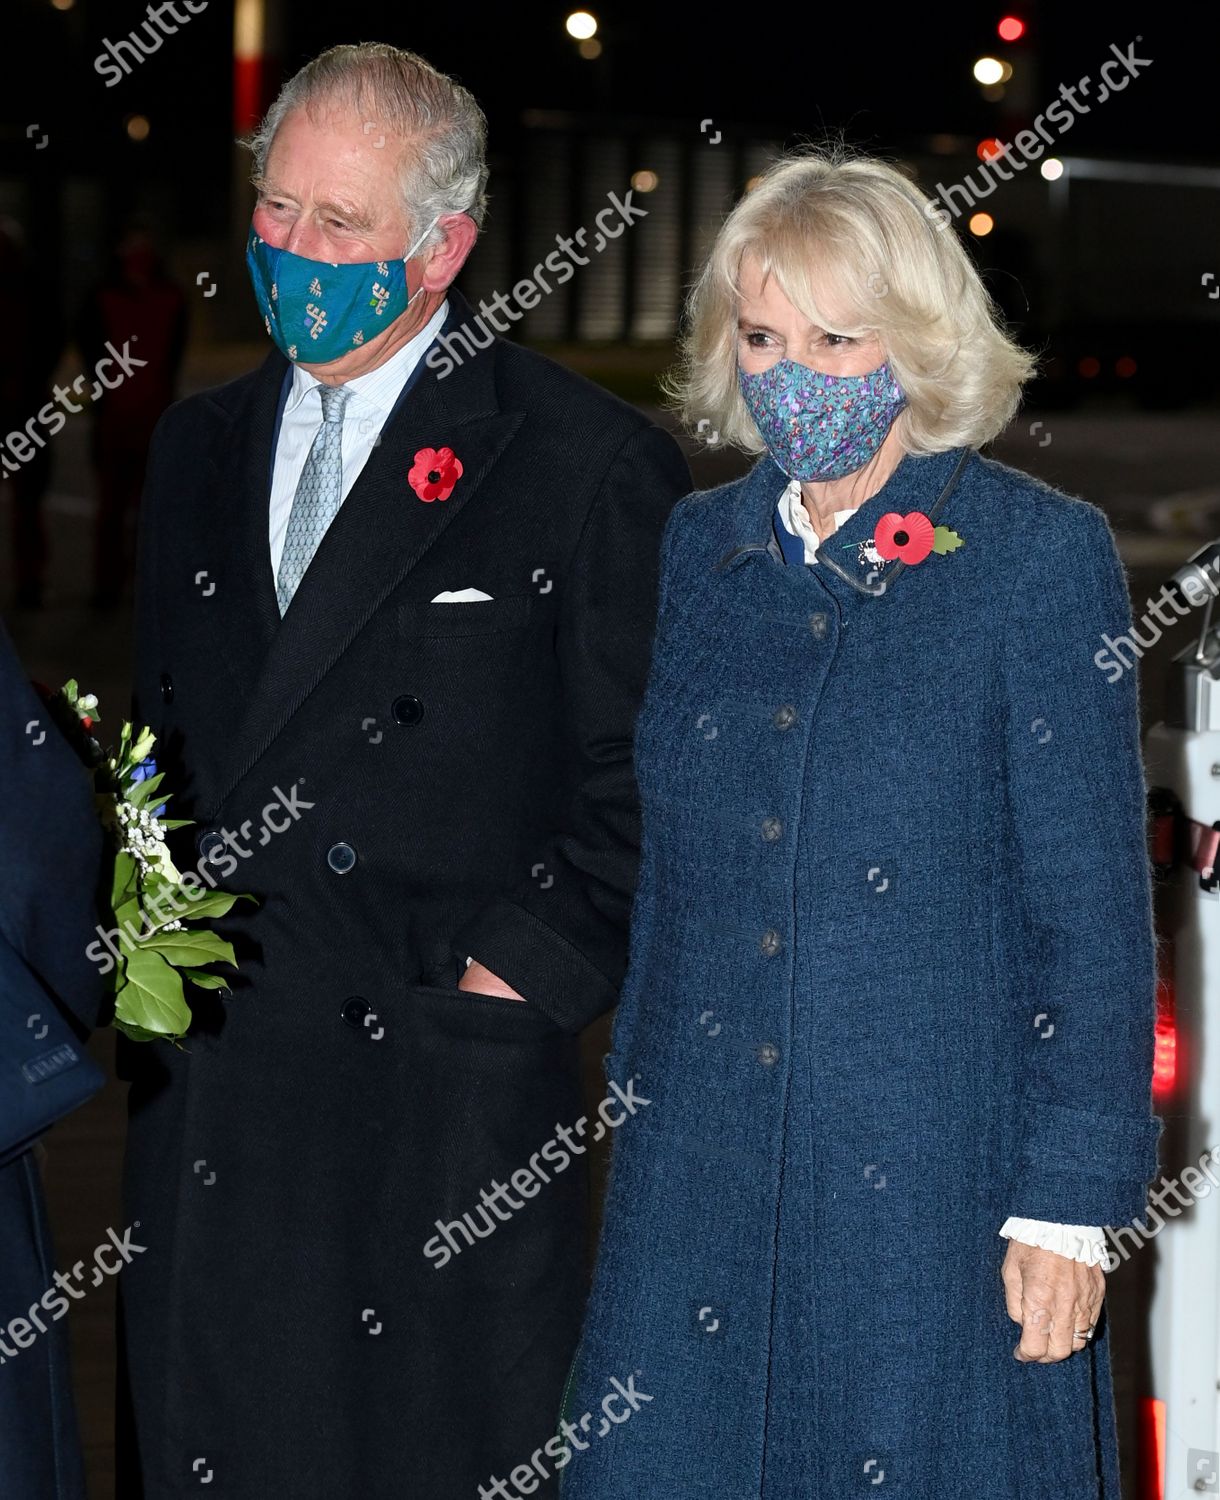 prince-charles-and-camilla-duchess-of-cornwall-visit-to-berlin-germany-shutterstock-editorial-11016152s.jpg